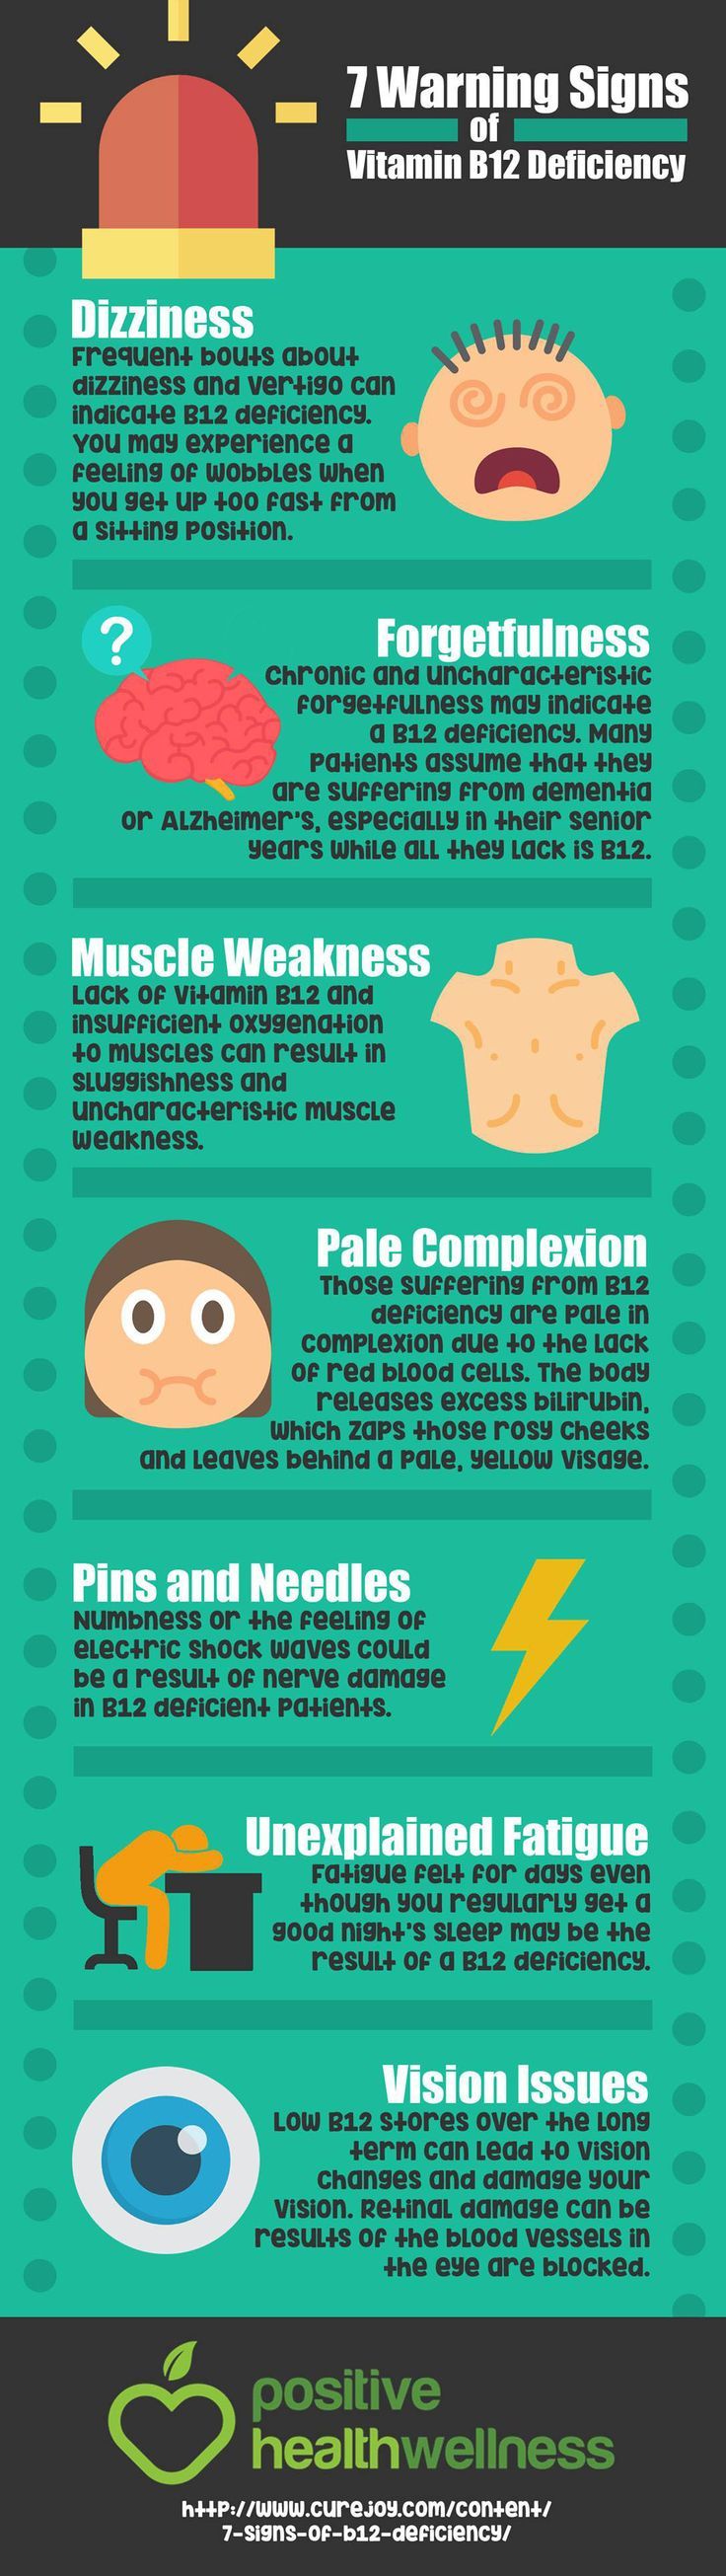 7 Warning Signs of Vitamin B12 Deficiency – Infographic